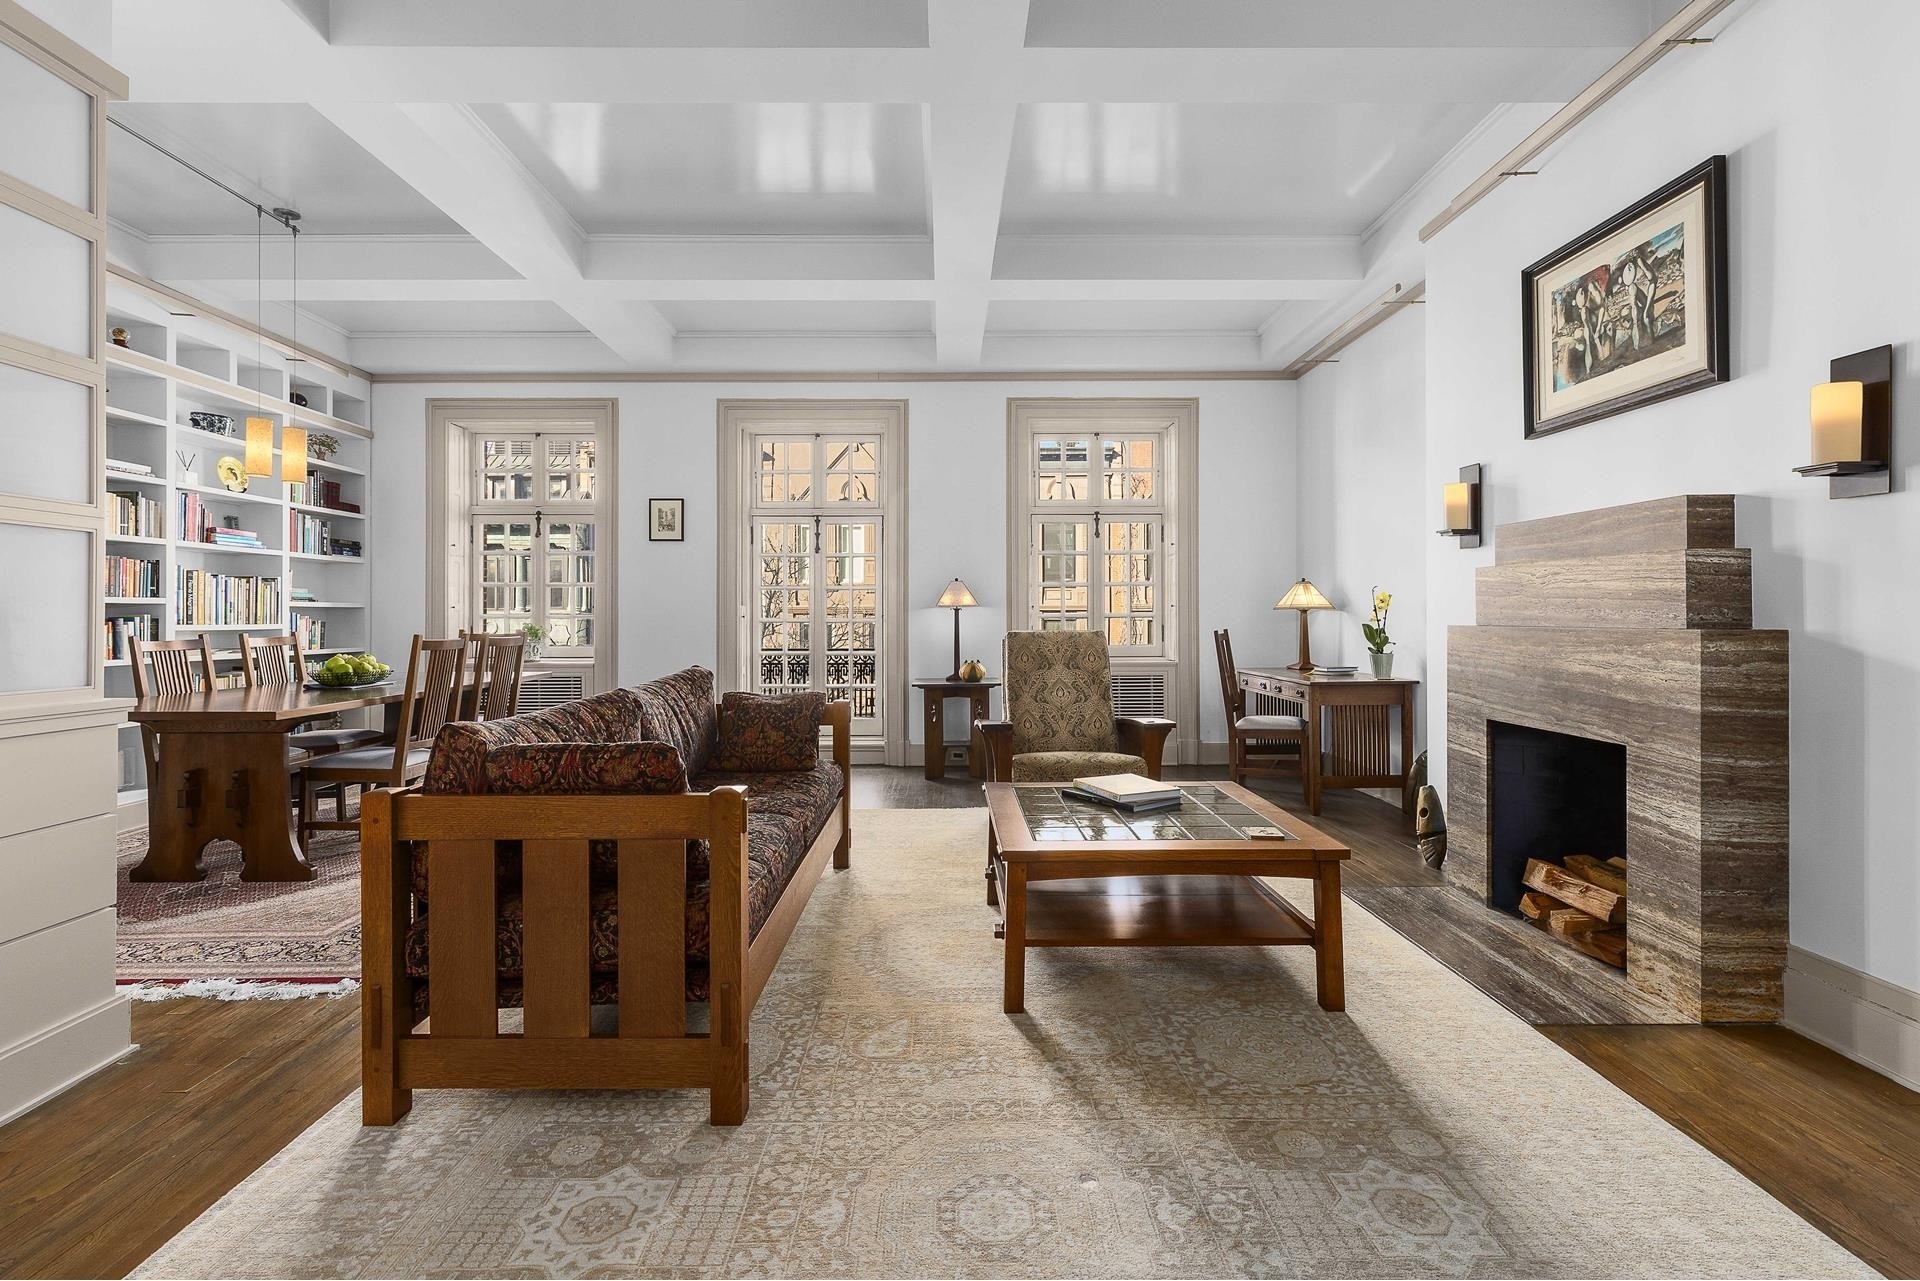 Co-op Properties for Sale at 34 W 74TH ST, 4C Upper West Side, New York, NY 10023